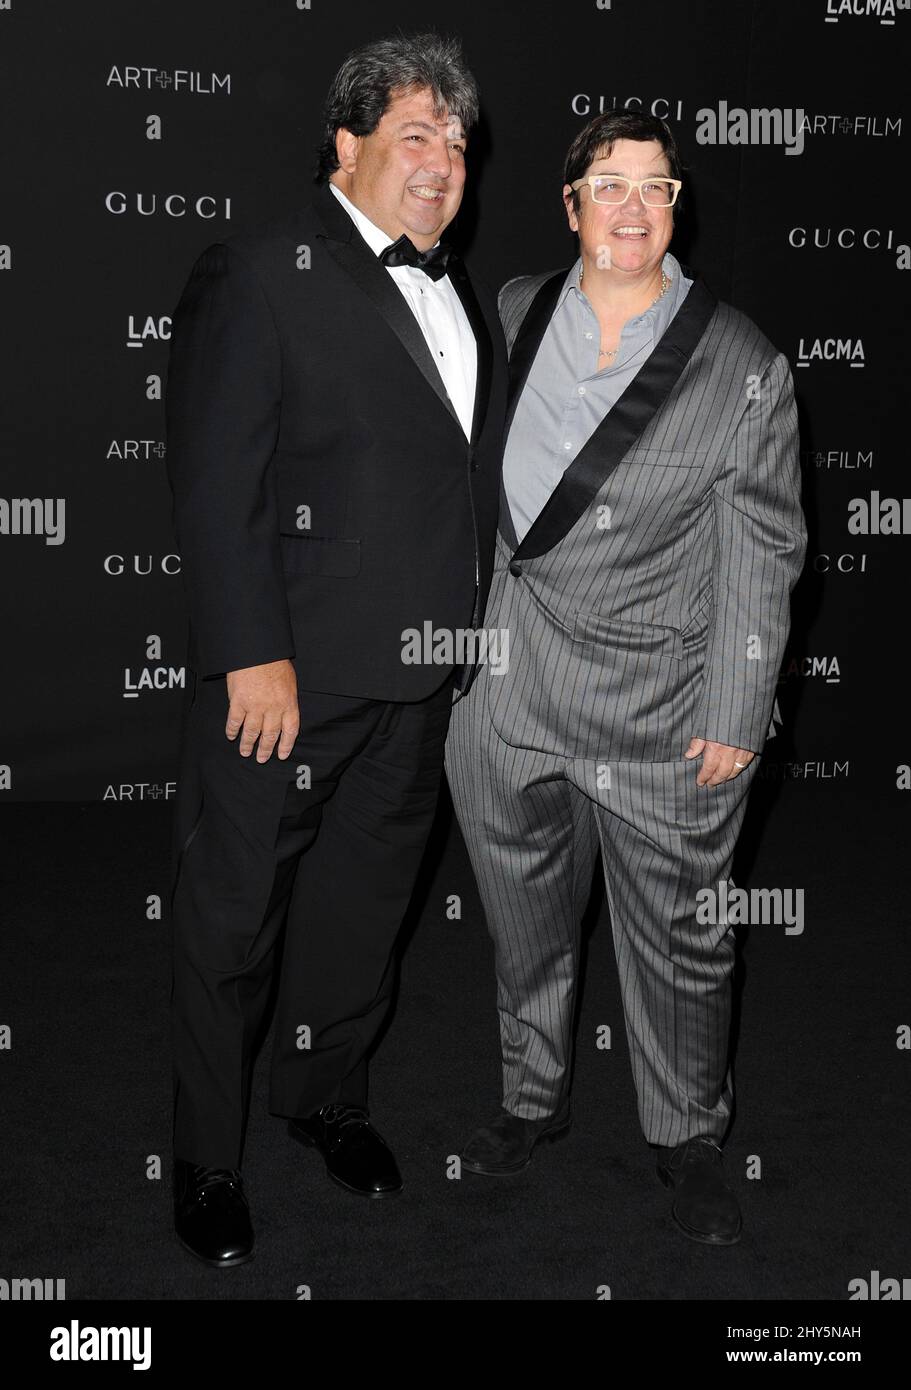 Cathy Opie, Paul Schimmel attends the 2014 LACMA Art + Film Gala at the LACMA, Los Angeles Stock Photo